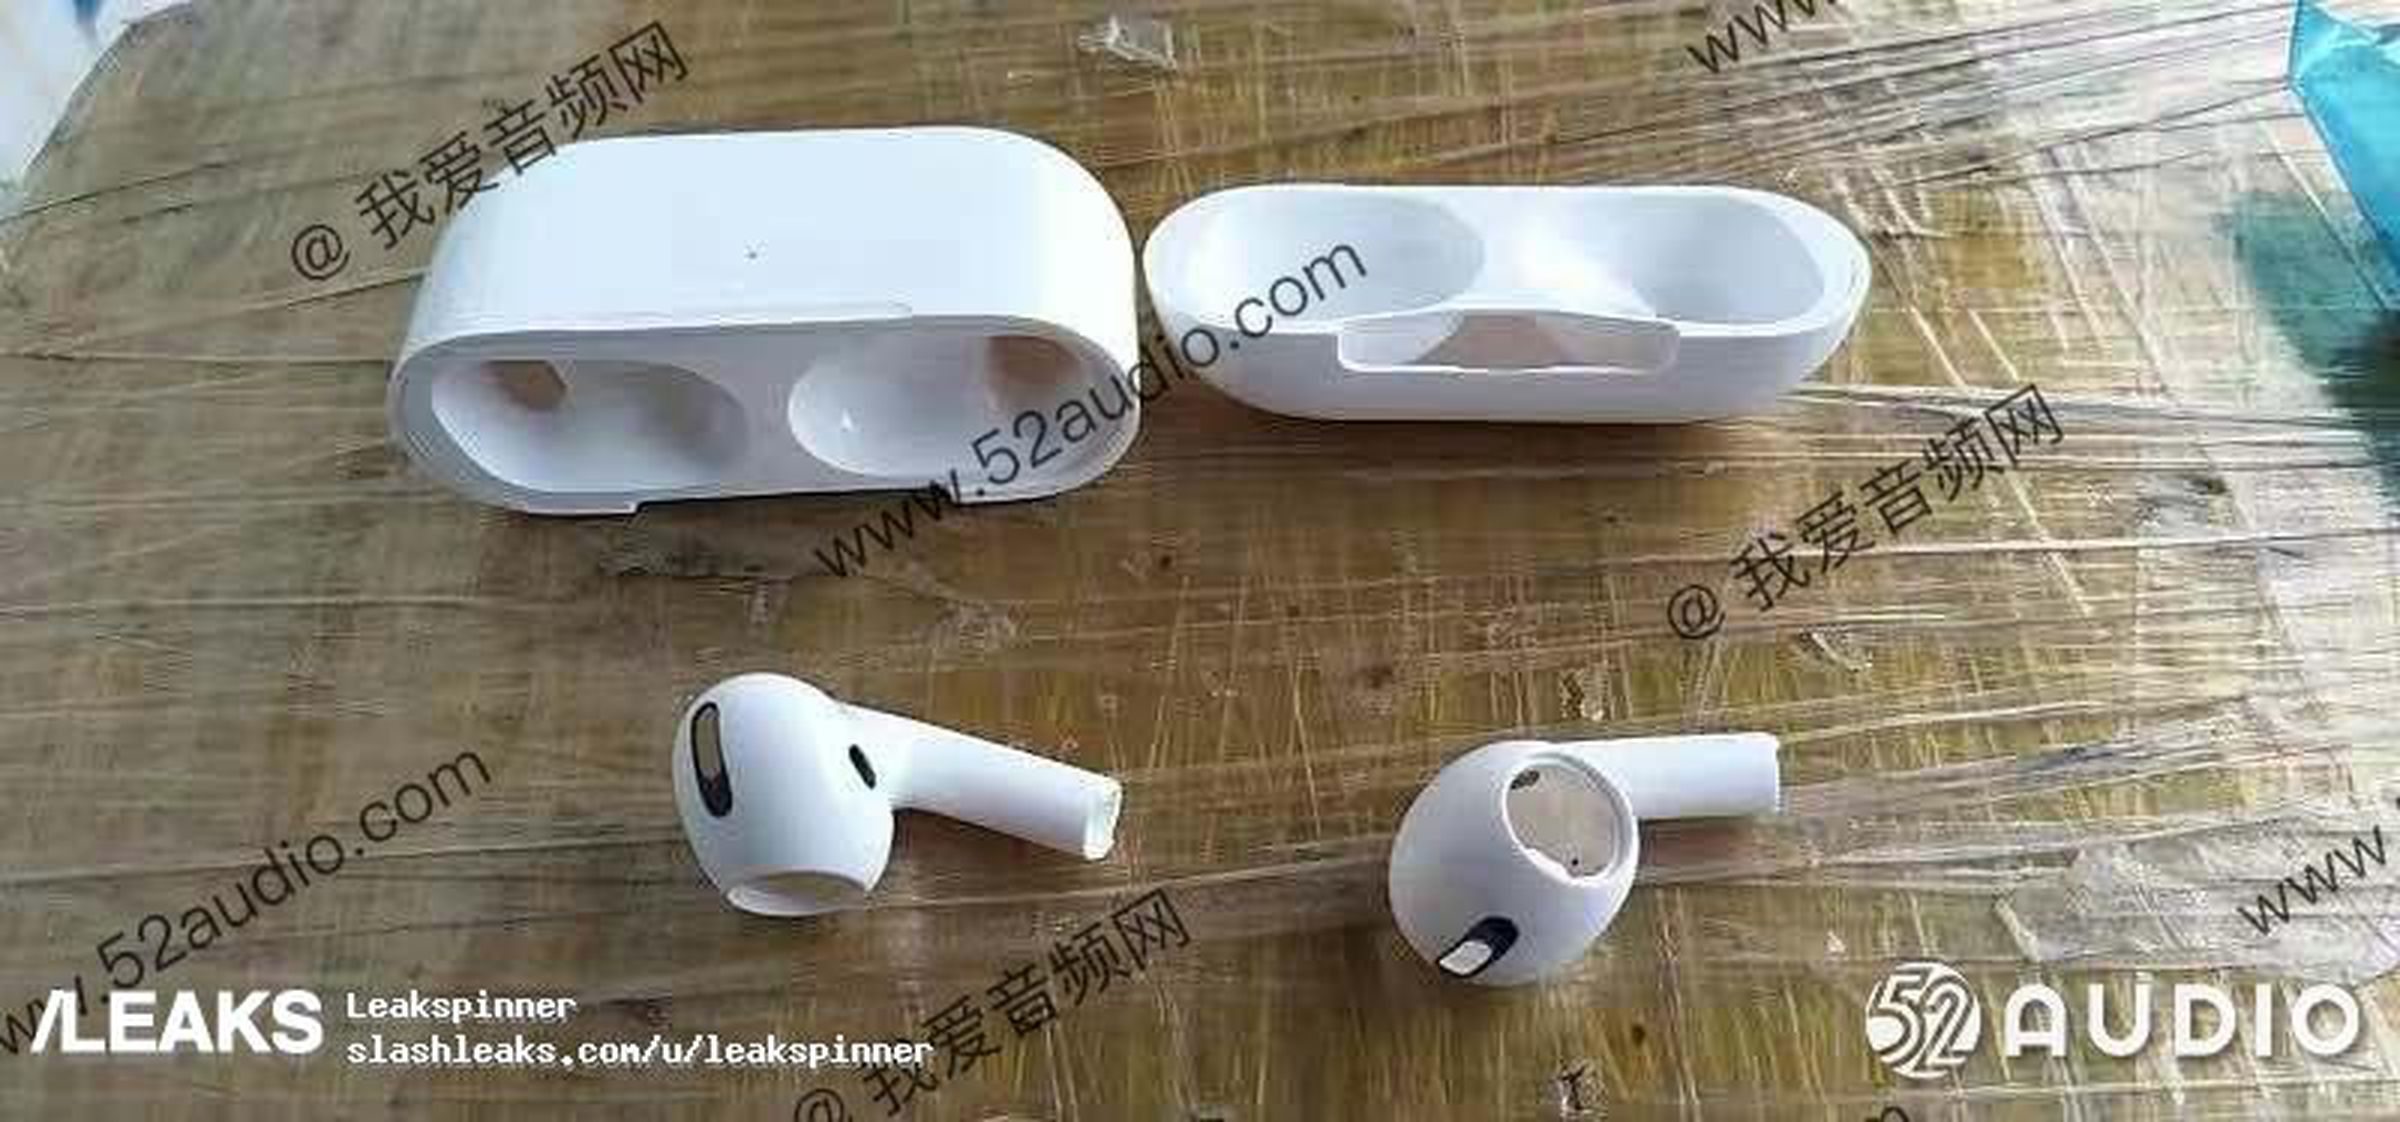 Alleged AirPods prototype